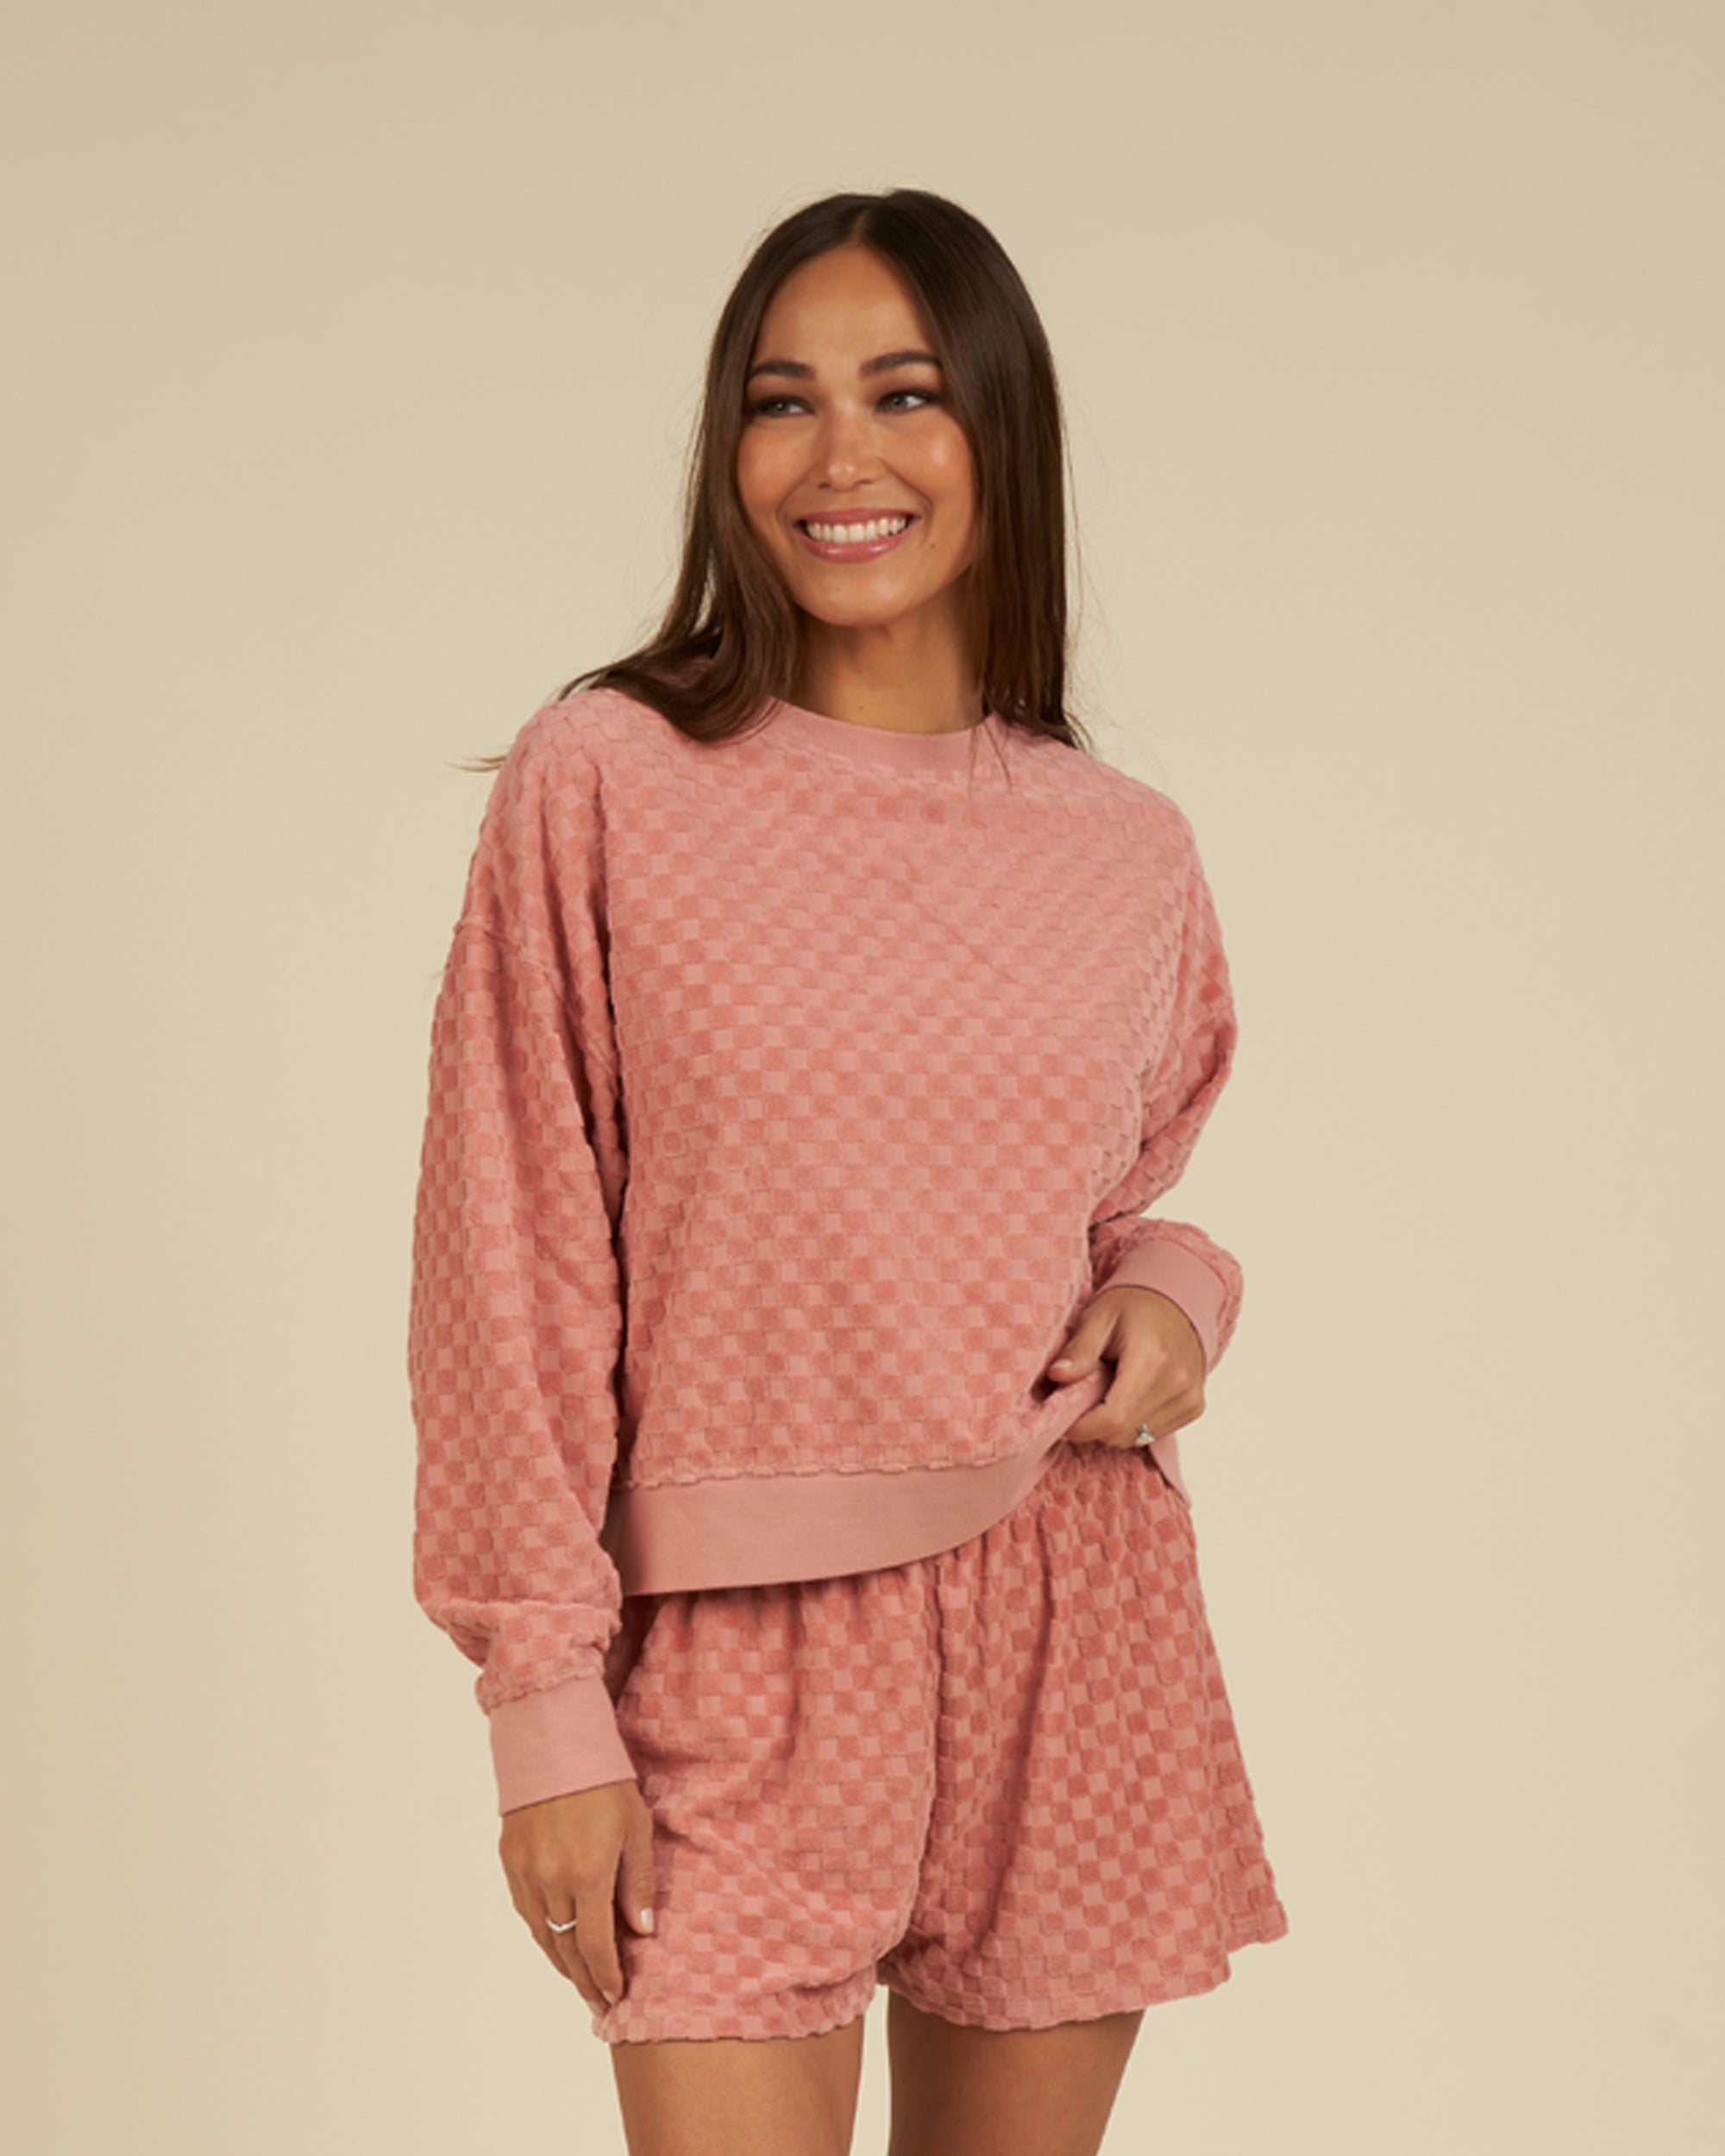 RYLEE + CRU WOMEN'S BOXY PULLOVER / PINK CHECK